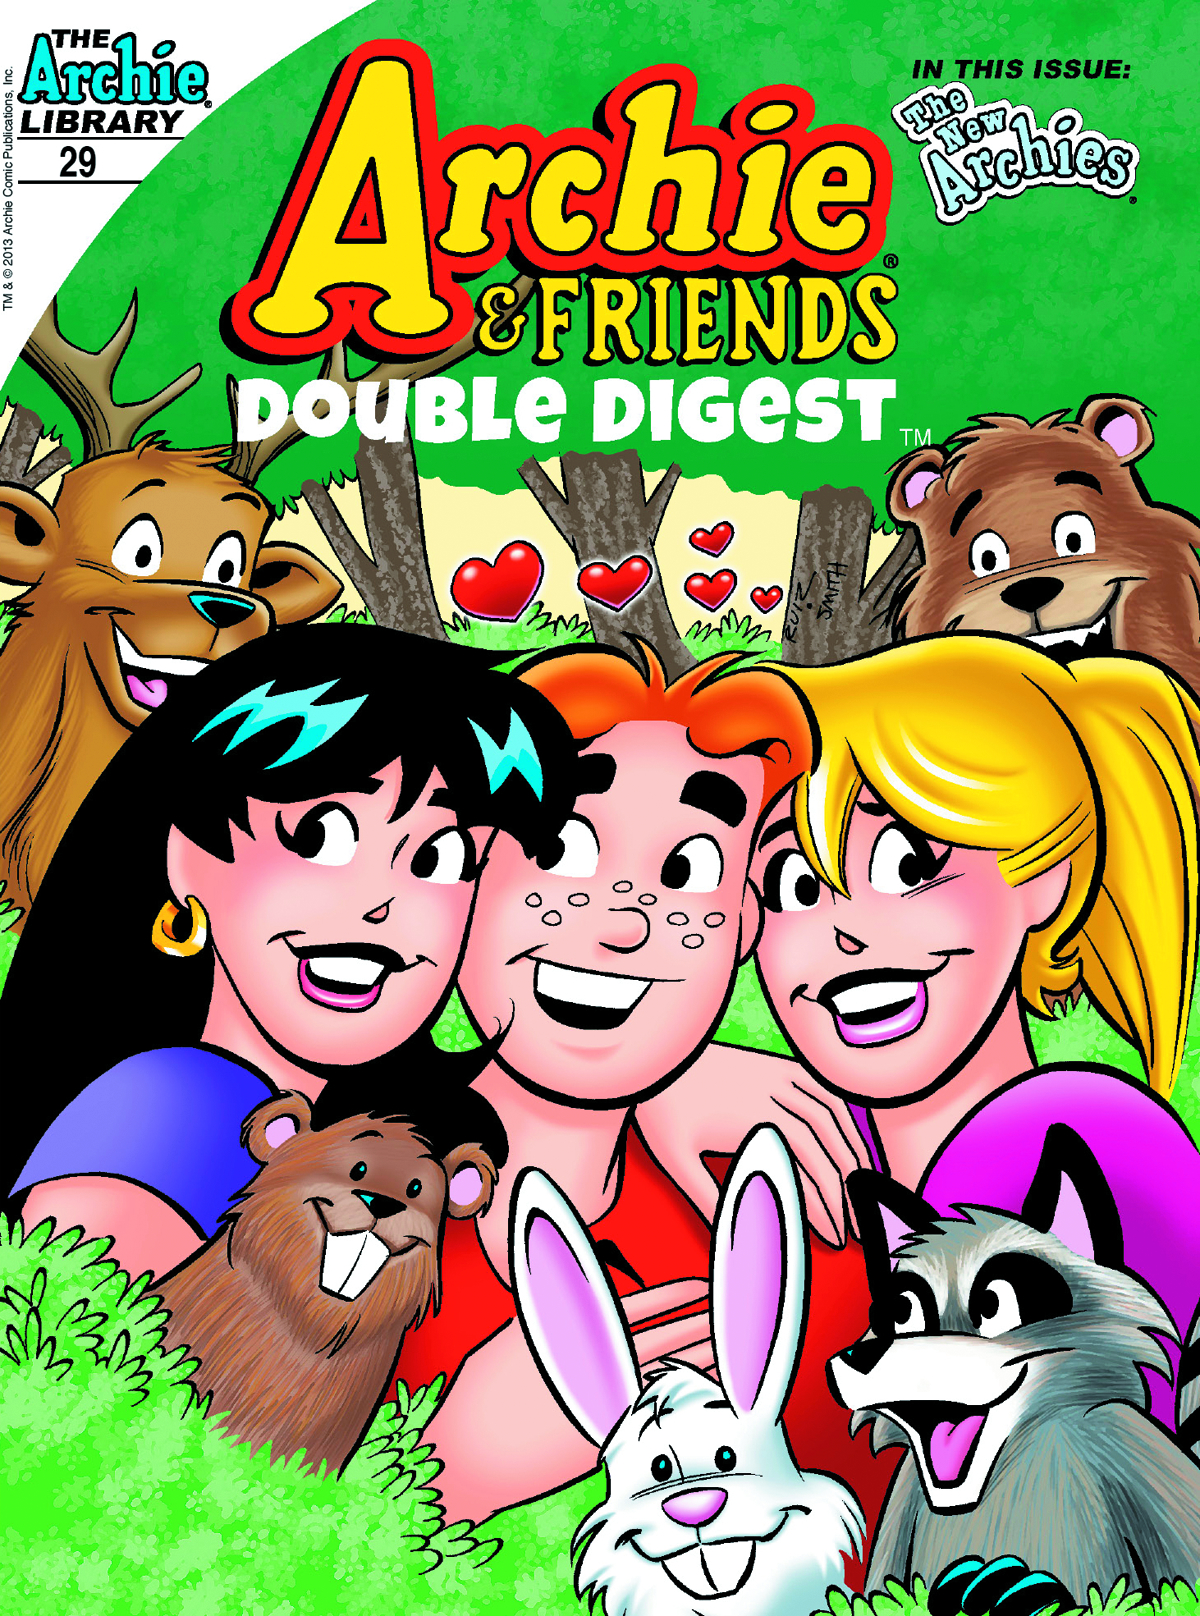 Friends issues. Archie and friends. Archie and friends Comics. Дабл френд. Archie animal.